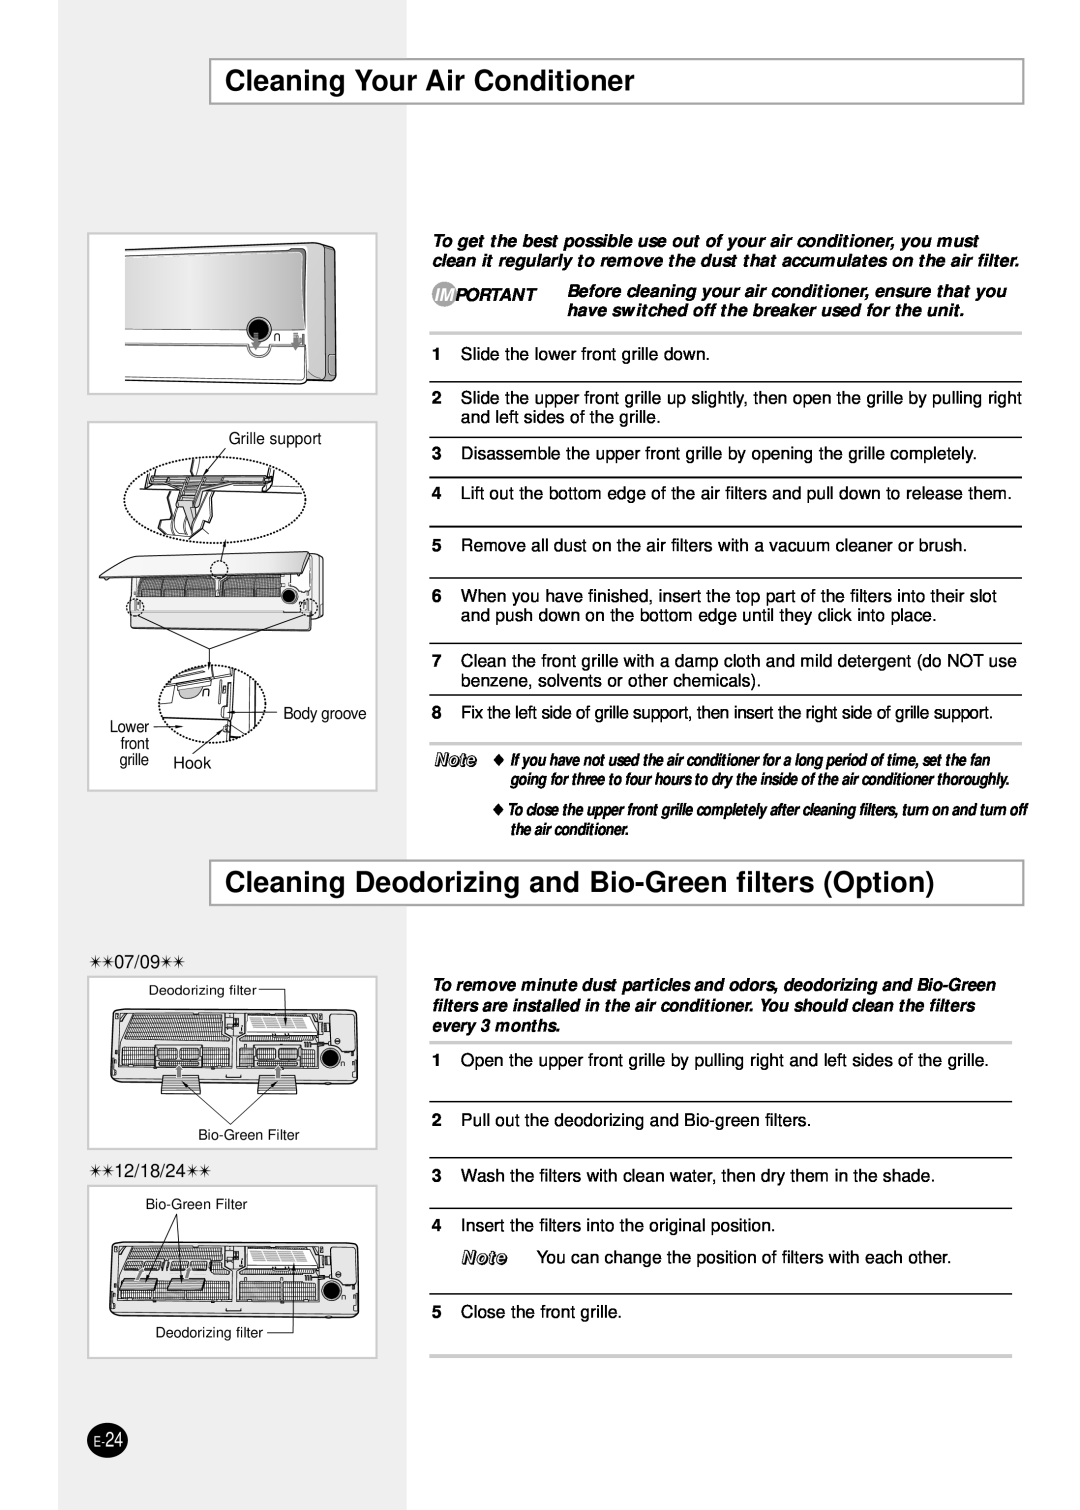 Samsung AQT24P6GE Cleaning Your Air Conditioner, Cleaning Deodorizing and Bio-Greenfilters Option, 07/09, 12/18/24 